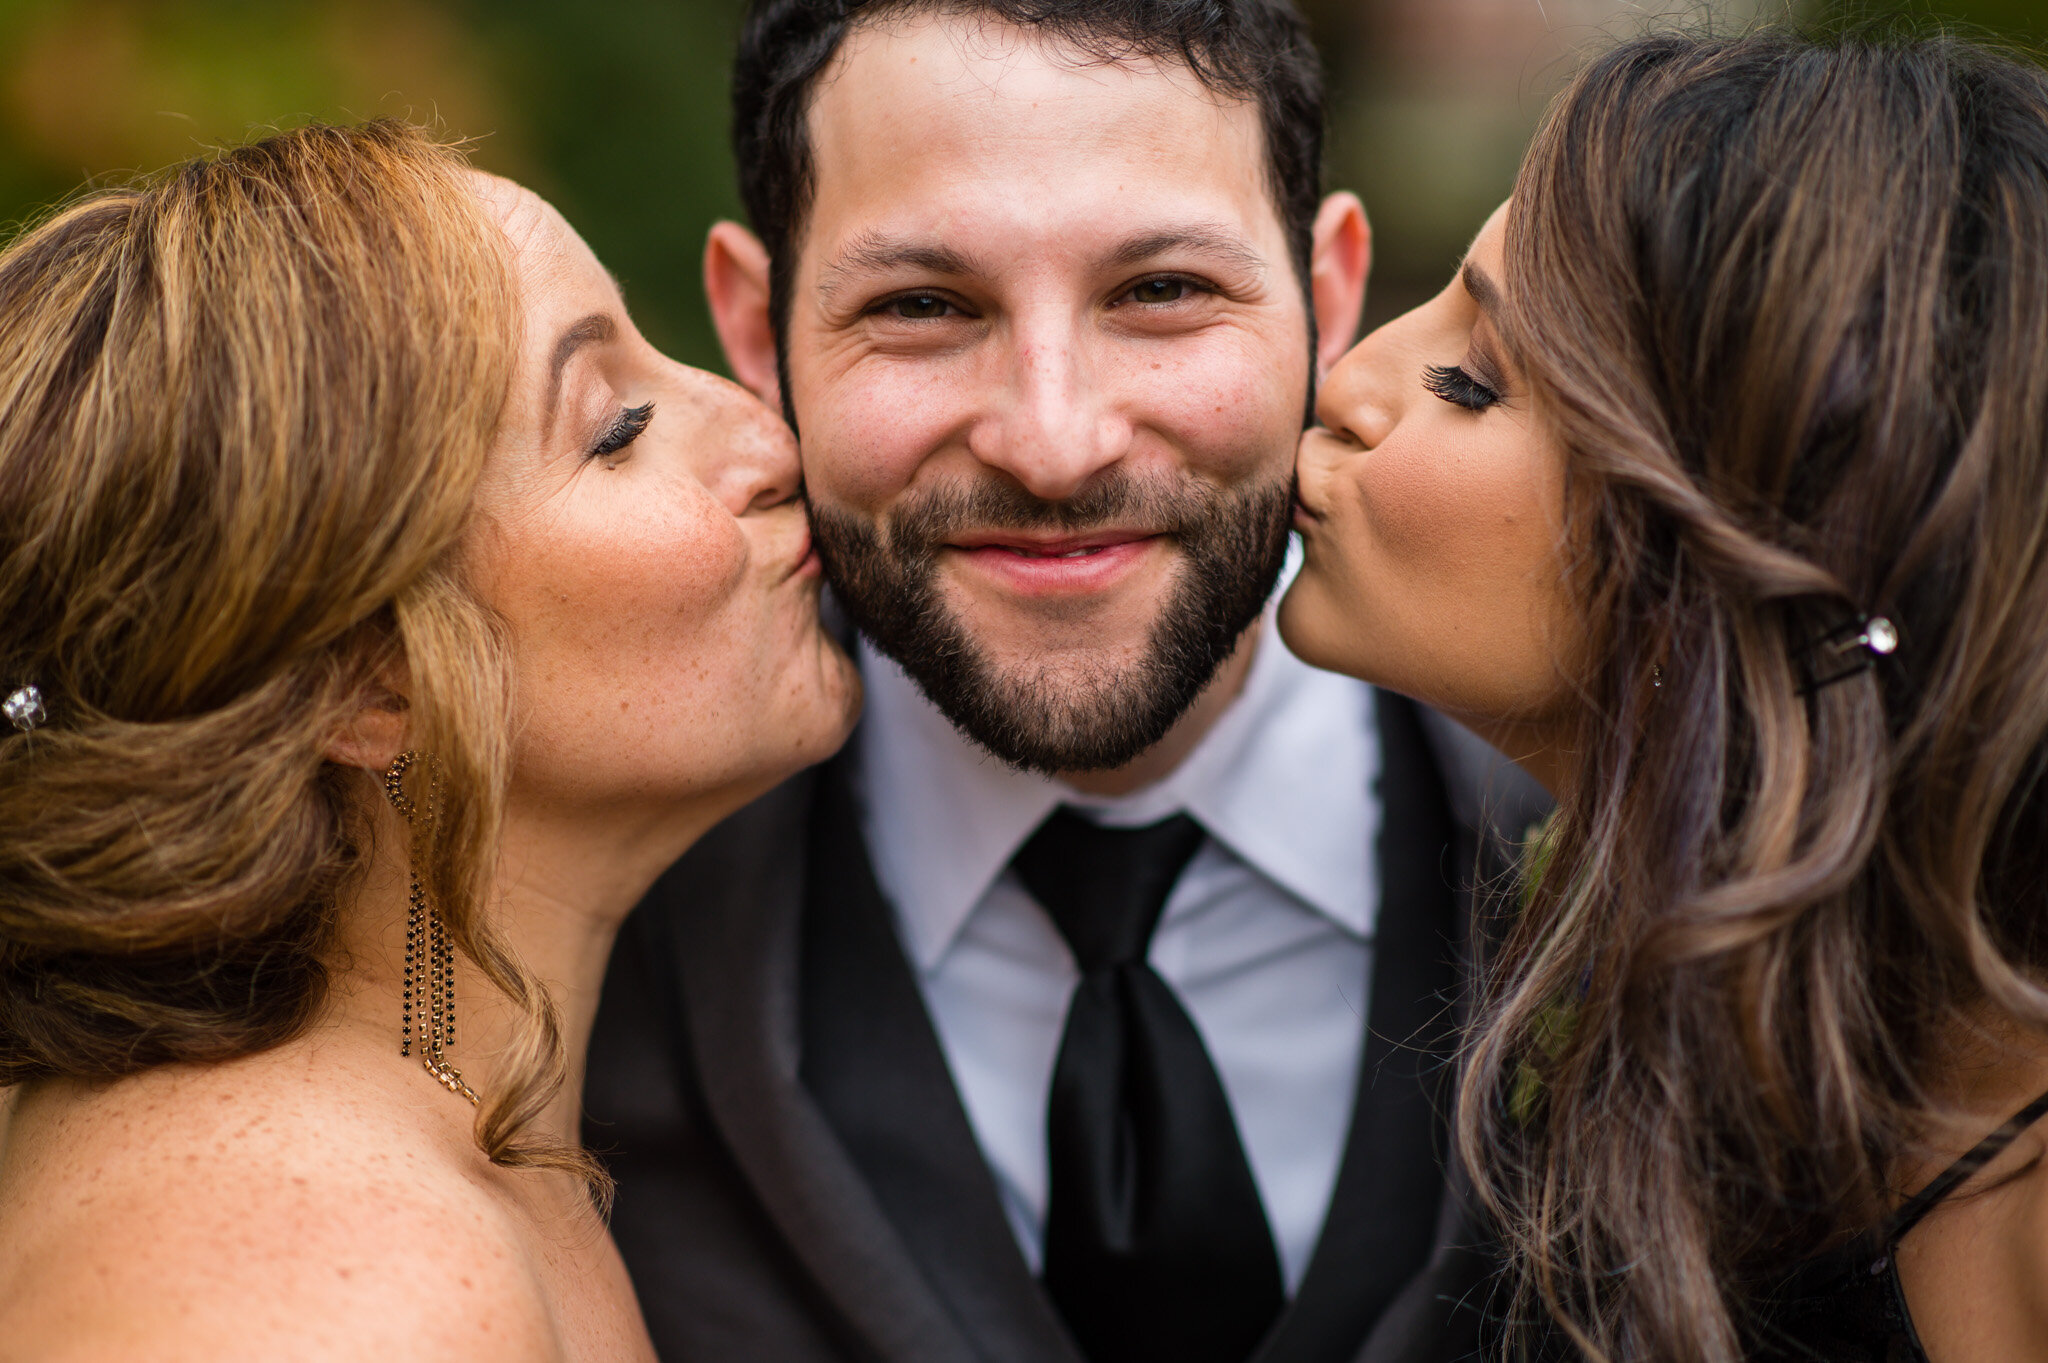 The groom and his two sisters share a moment together